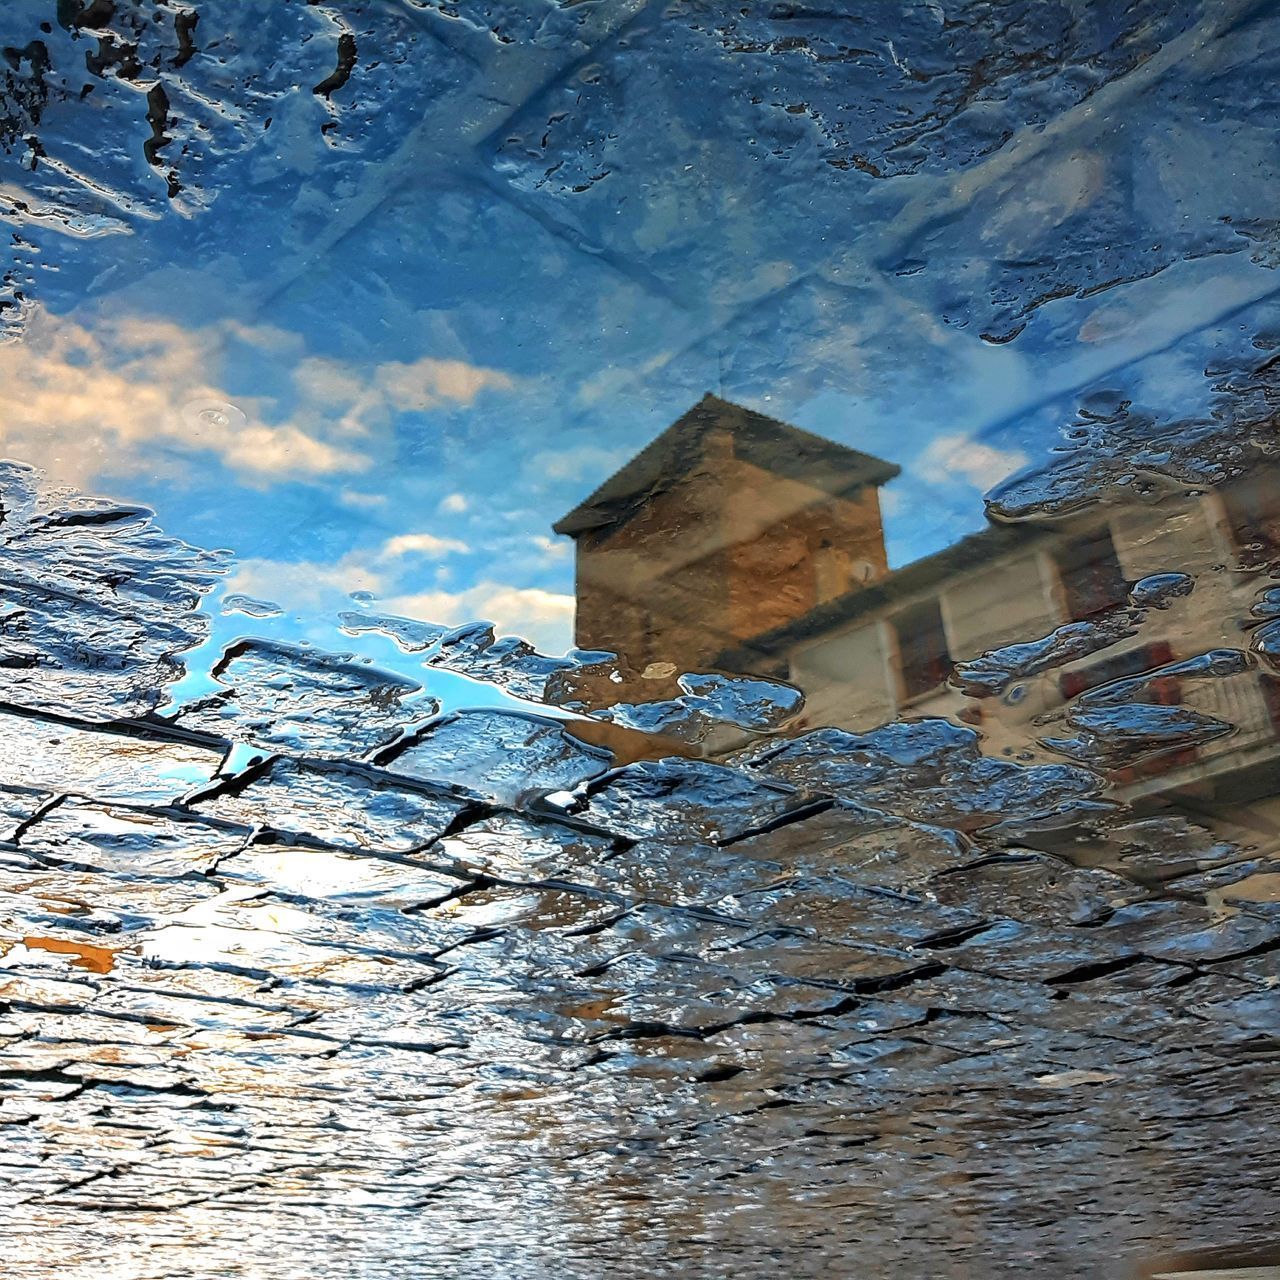 LOW ANGLE VIEW OF BUILDING AGAINST SKY IN PUDDLE